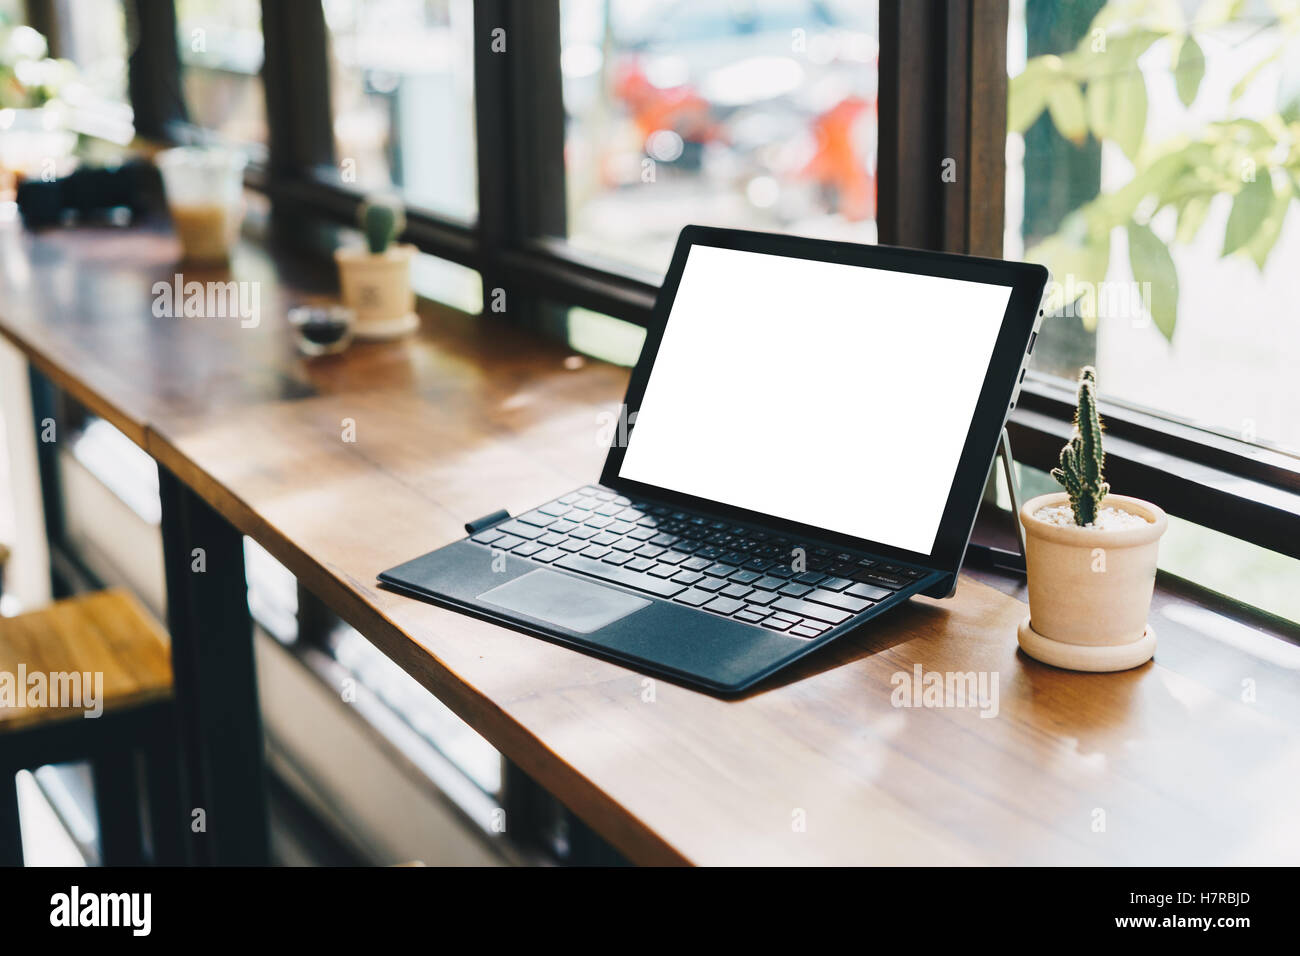 Laptop with blank screen on table,Responsive design mockup,Corporate identity mock up on desk with laptop computer,smart phone,c Stock Photo